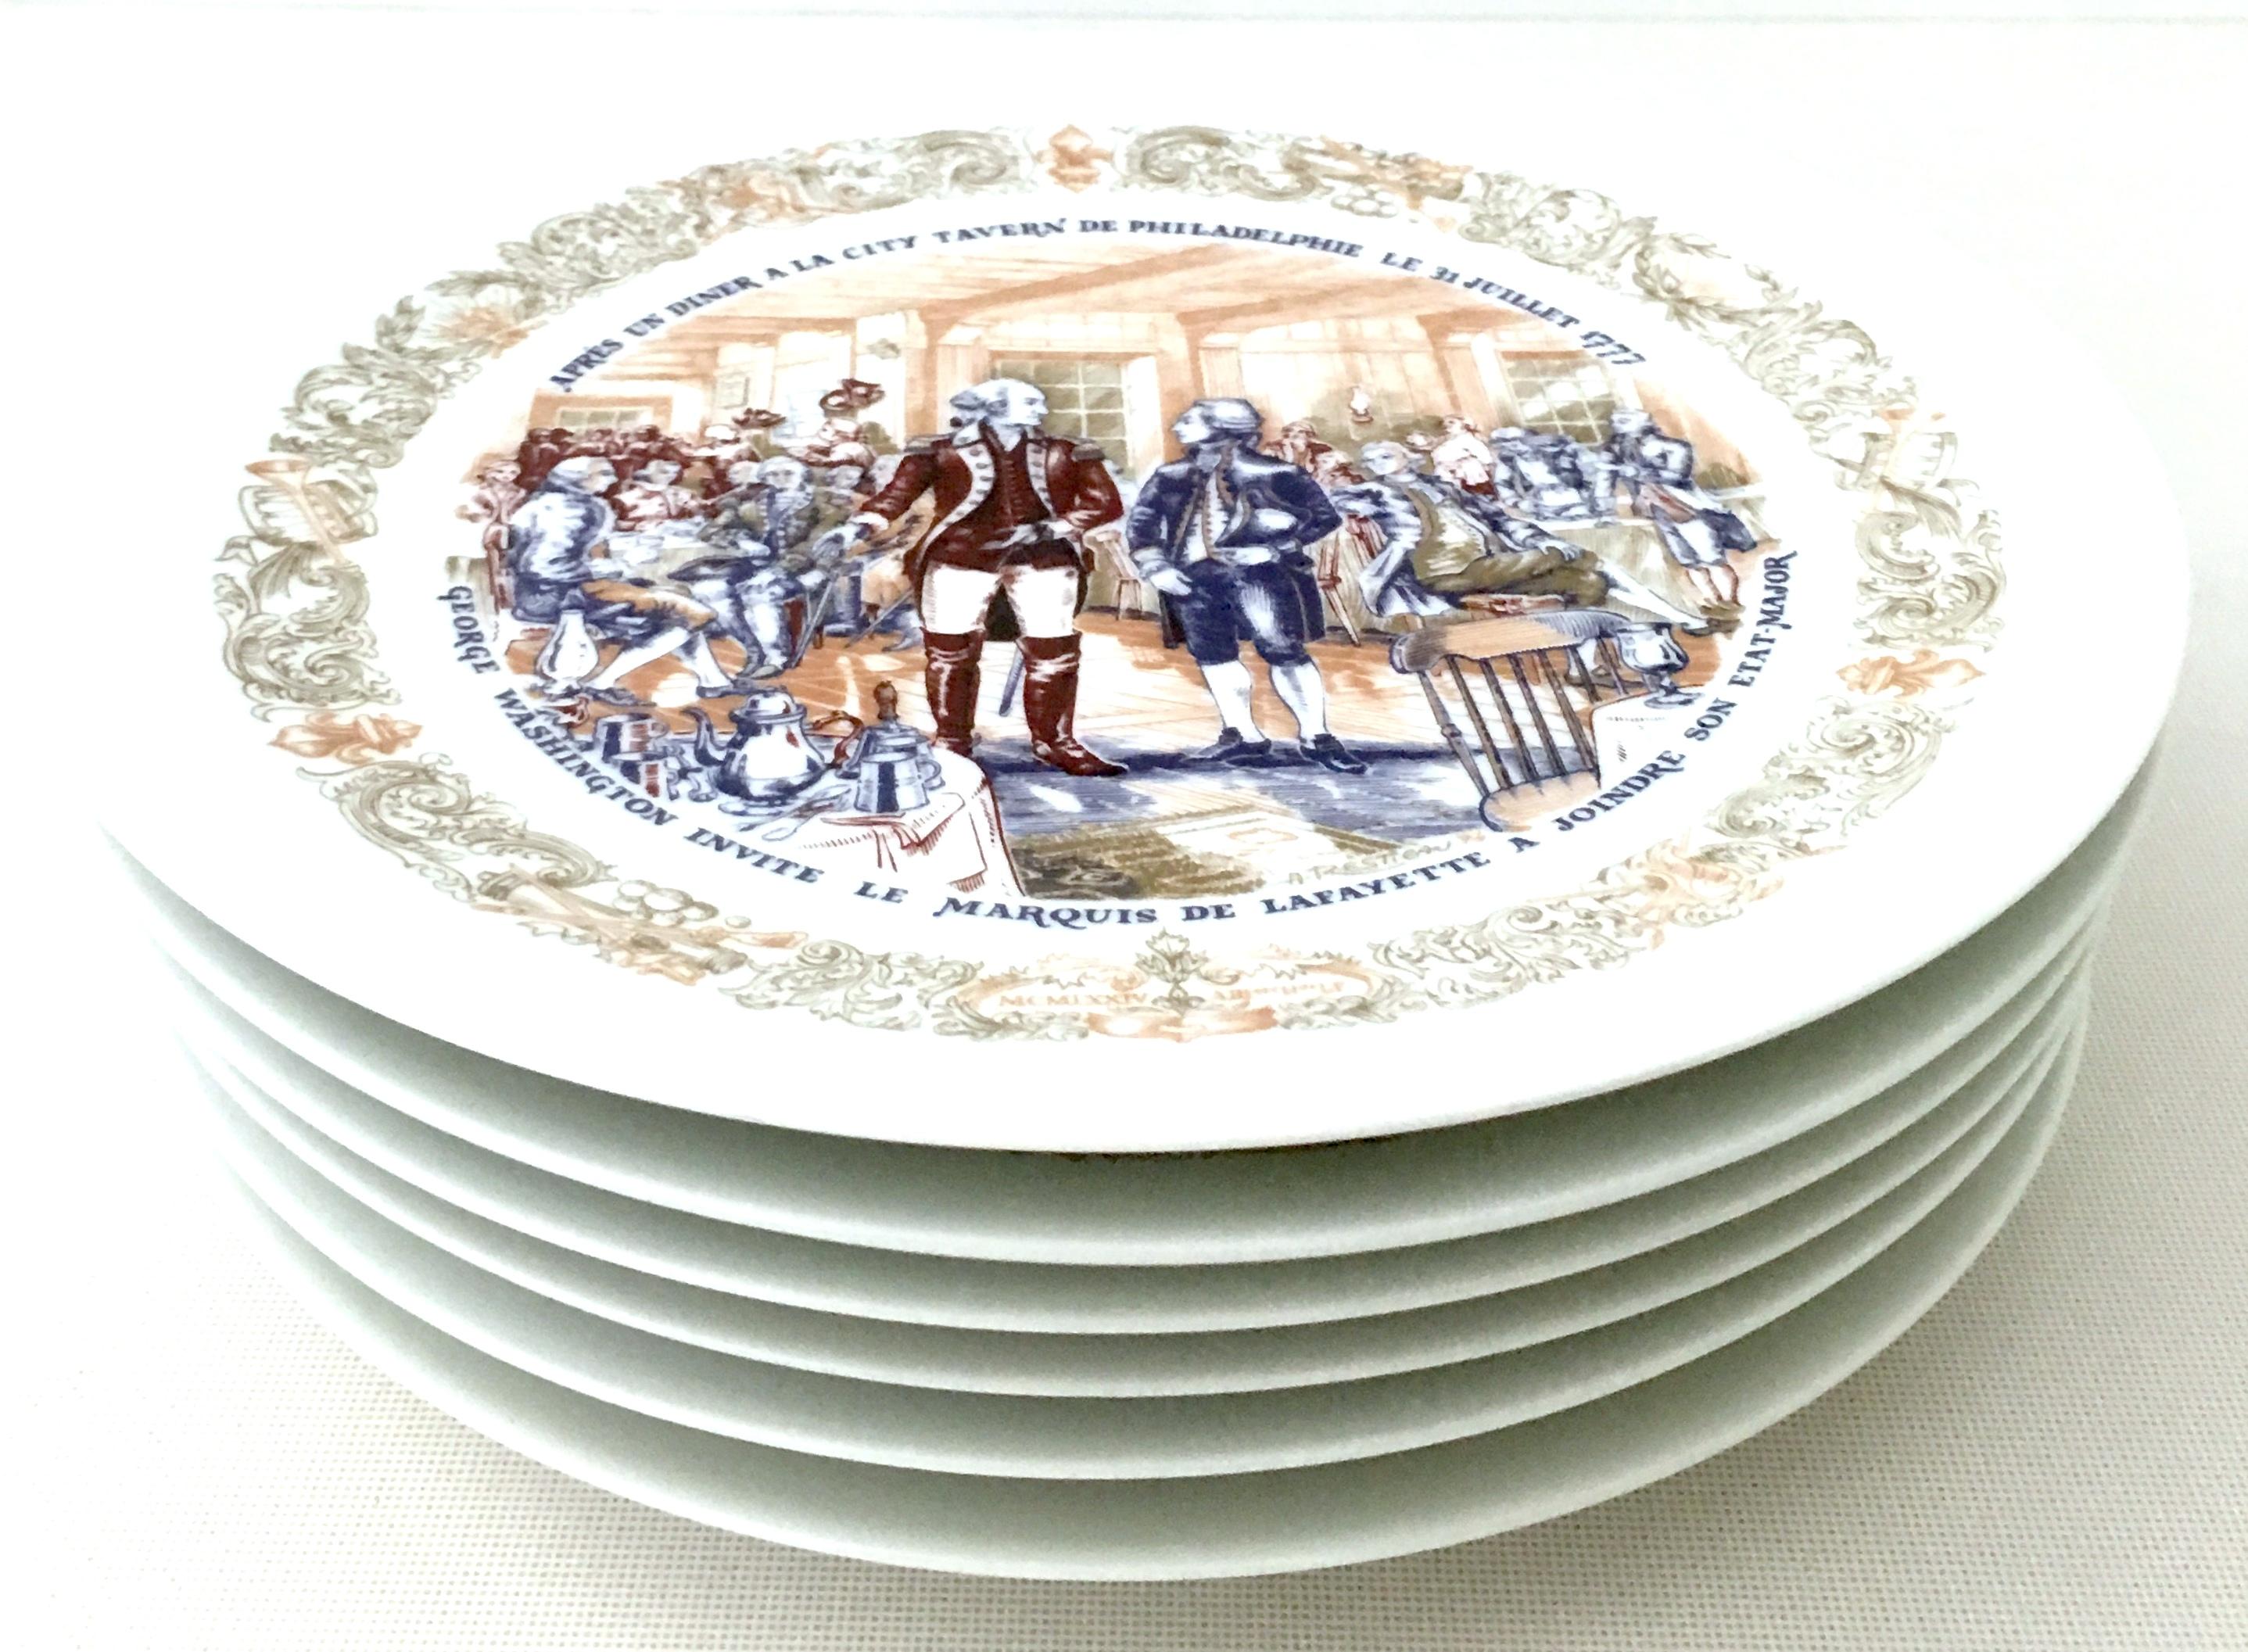 1970s Limoges France set of 6 Bicentennial Limited Edition salad/dessert plates by, D'Arceau. Limoges. These six plates are all of a different motif, commemorating revolutionary war scenes of the United States Bicentennial. Each collector plate is